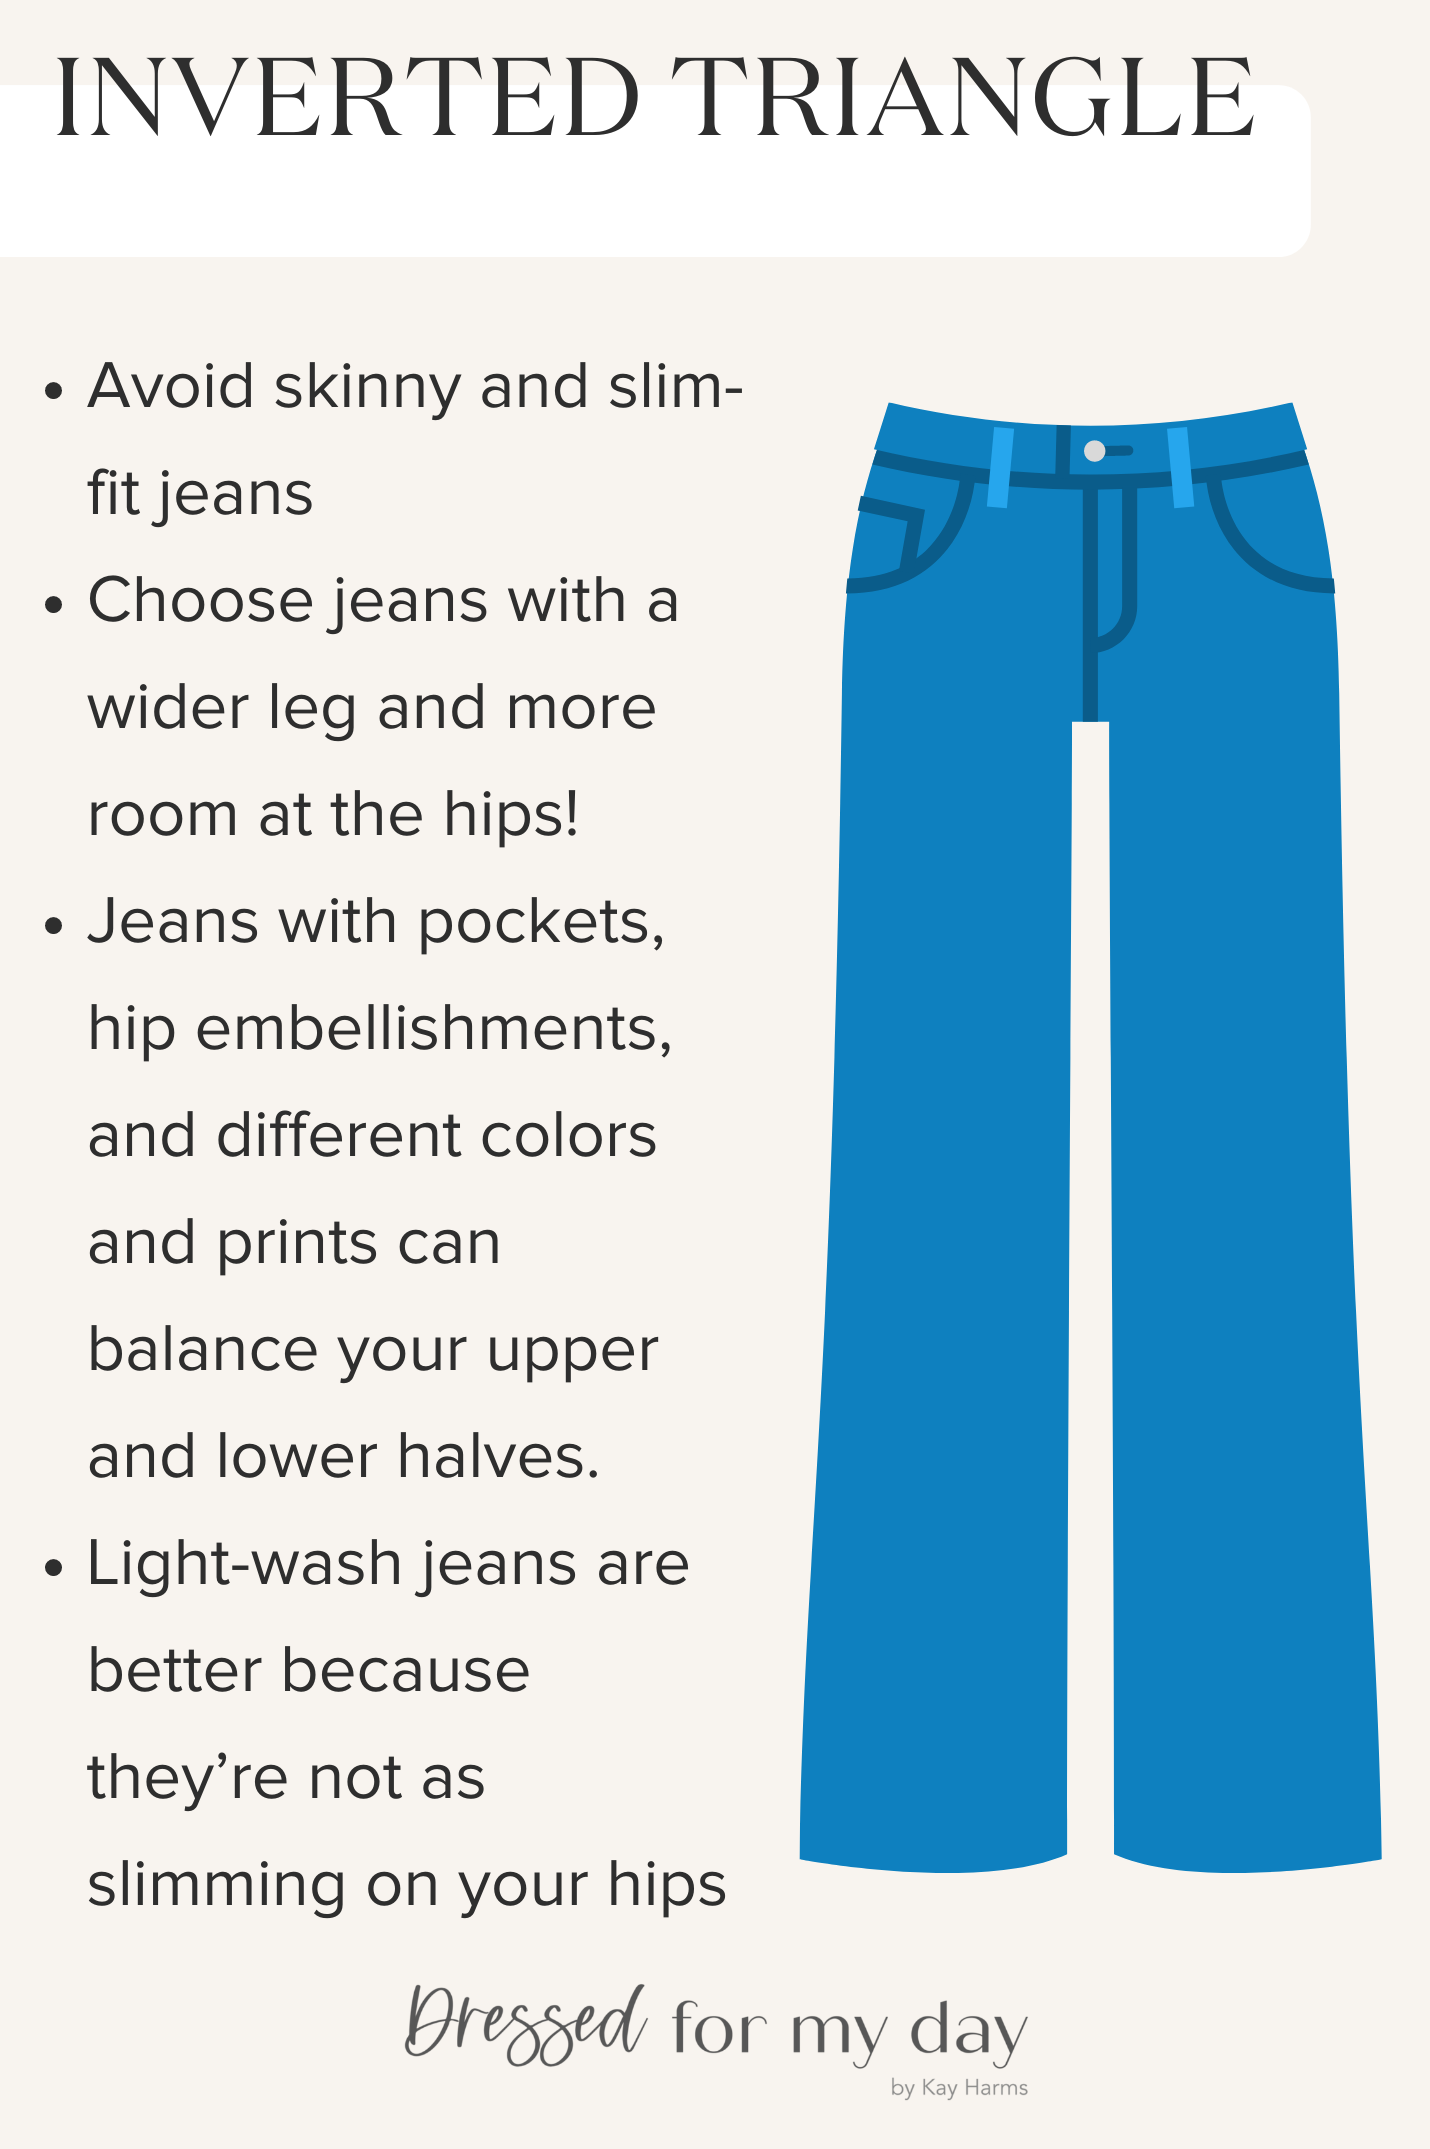 Denim Fit Tips for an Inverted Triangle